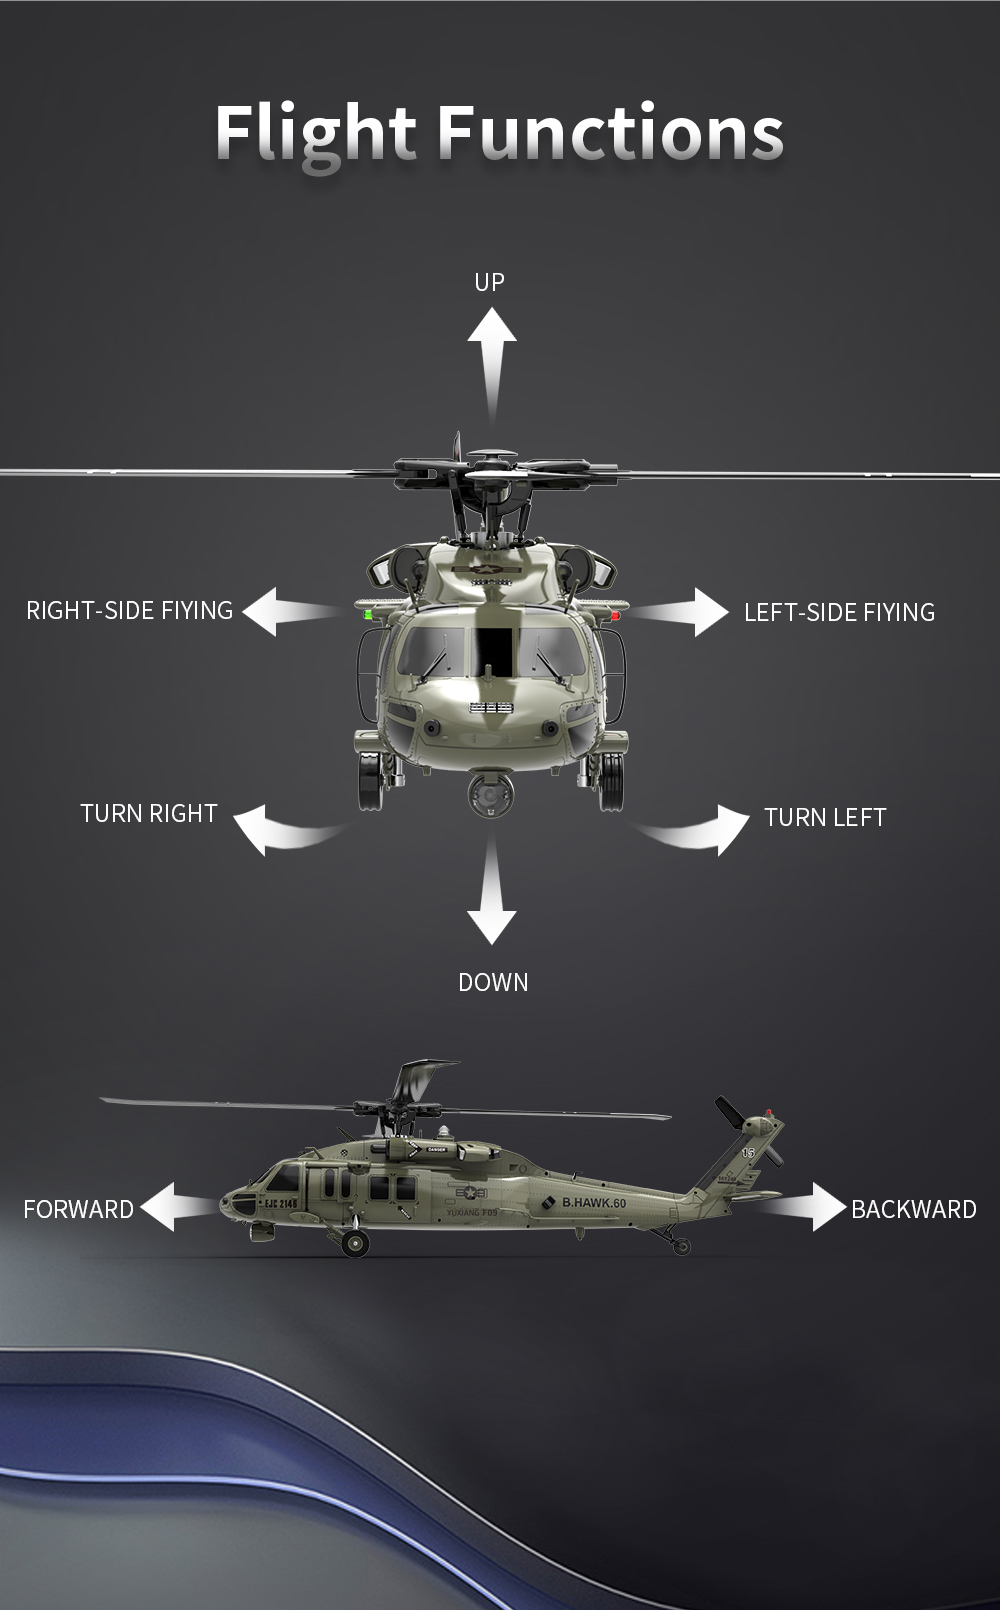 UH-60 Black Hawk RC Military Helicopter (AH-64 Apache Green 700 Size Scale Helicopter)